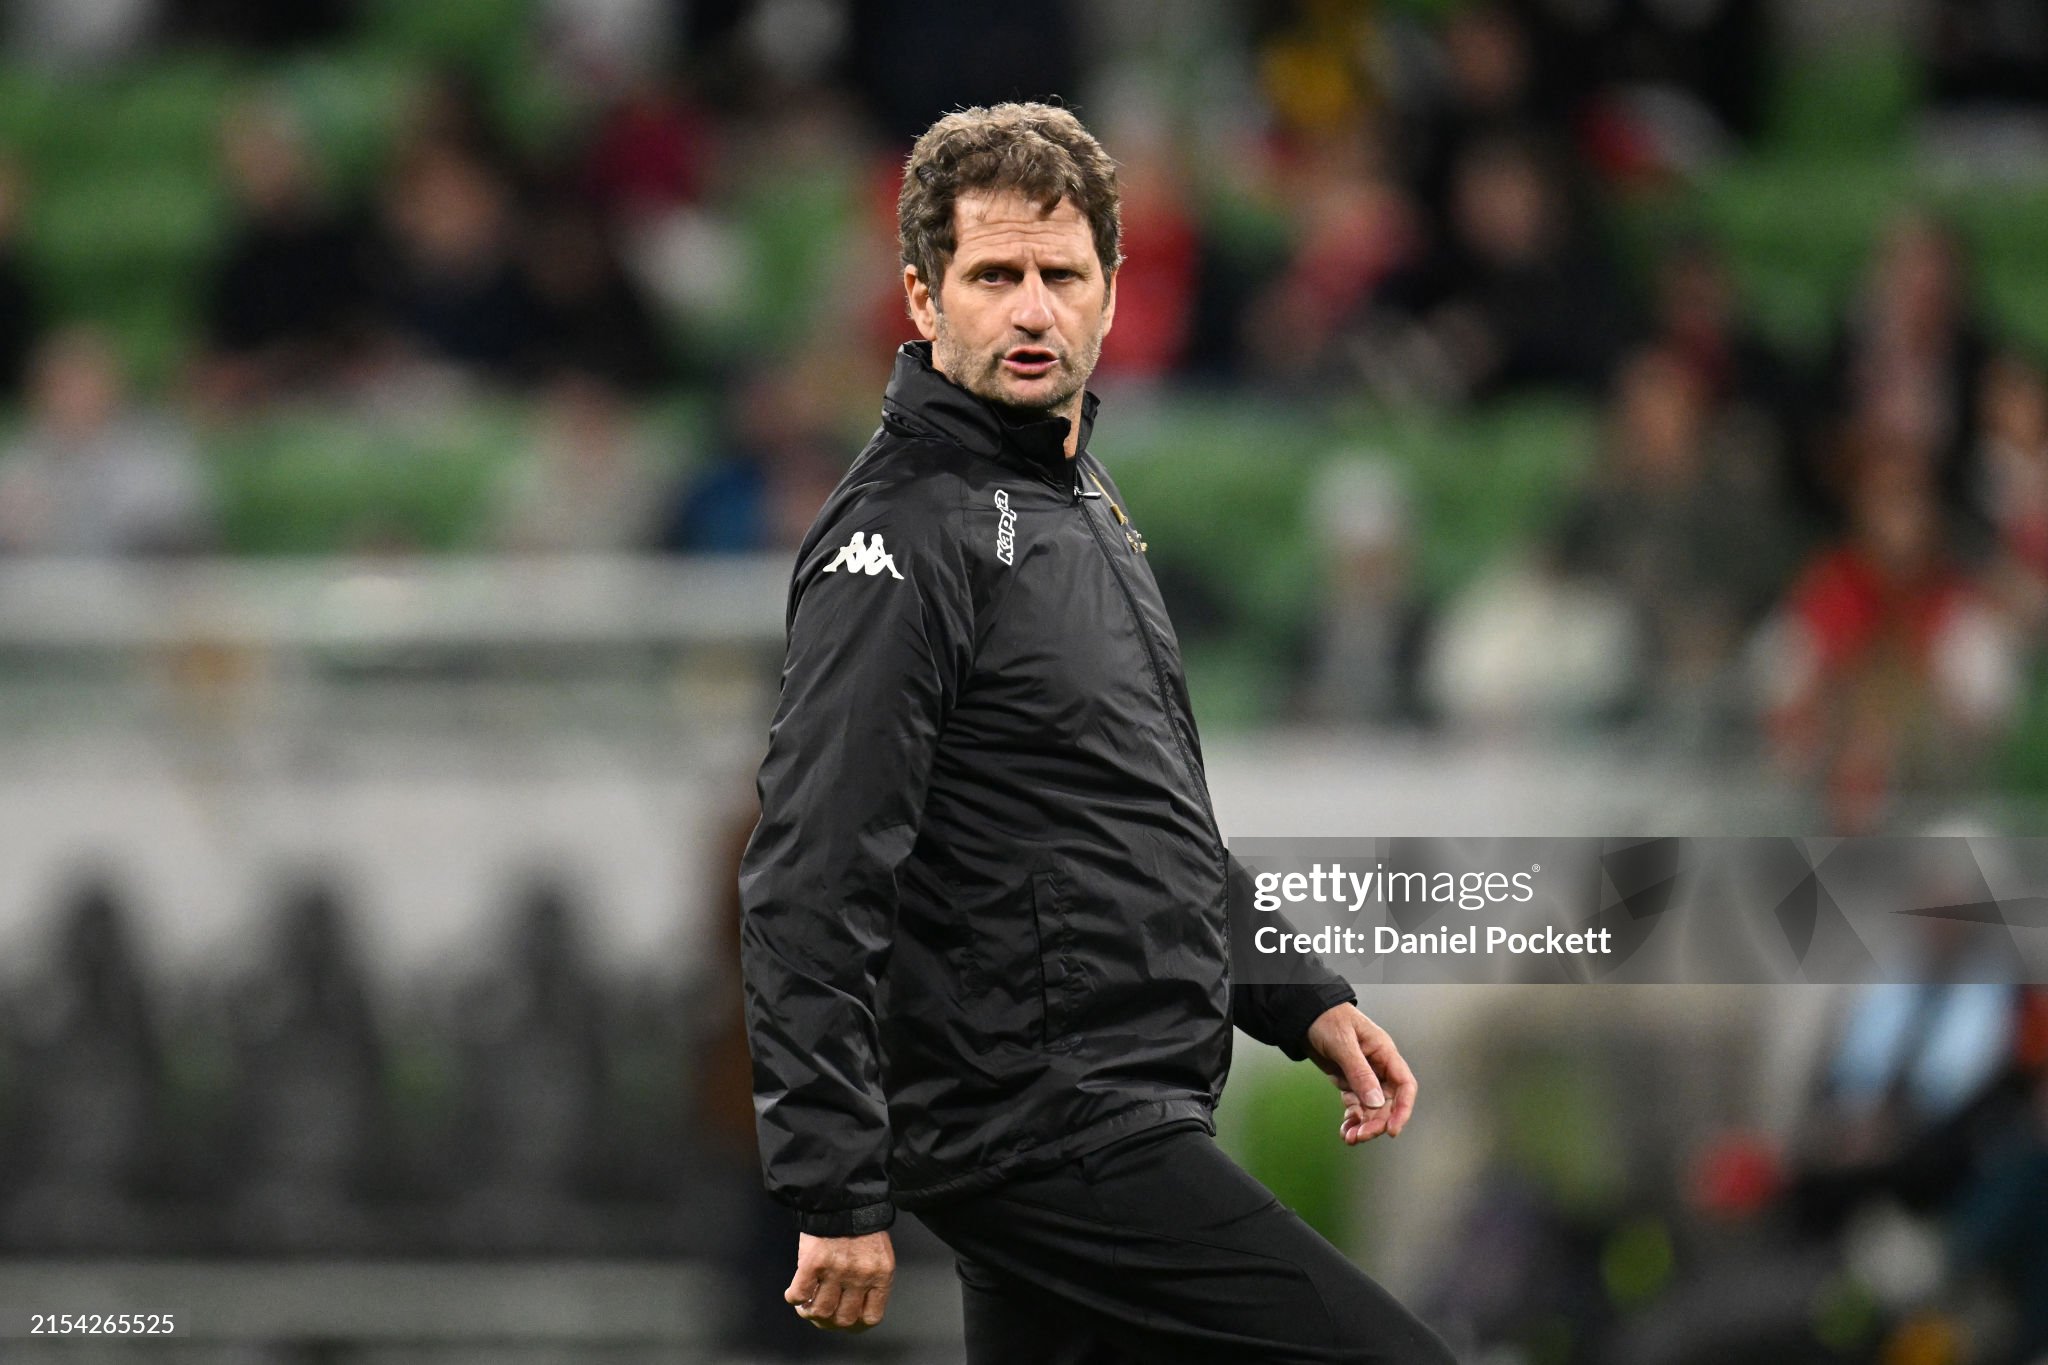 Joe Montemurro appointed new manager of Olympique Lyonnais Féminin